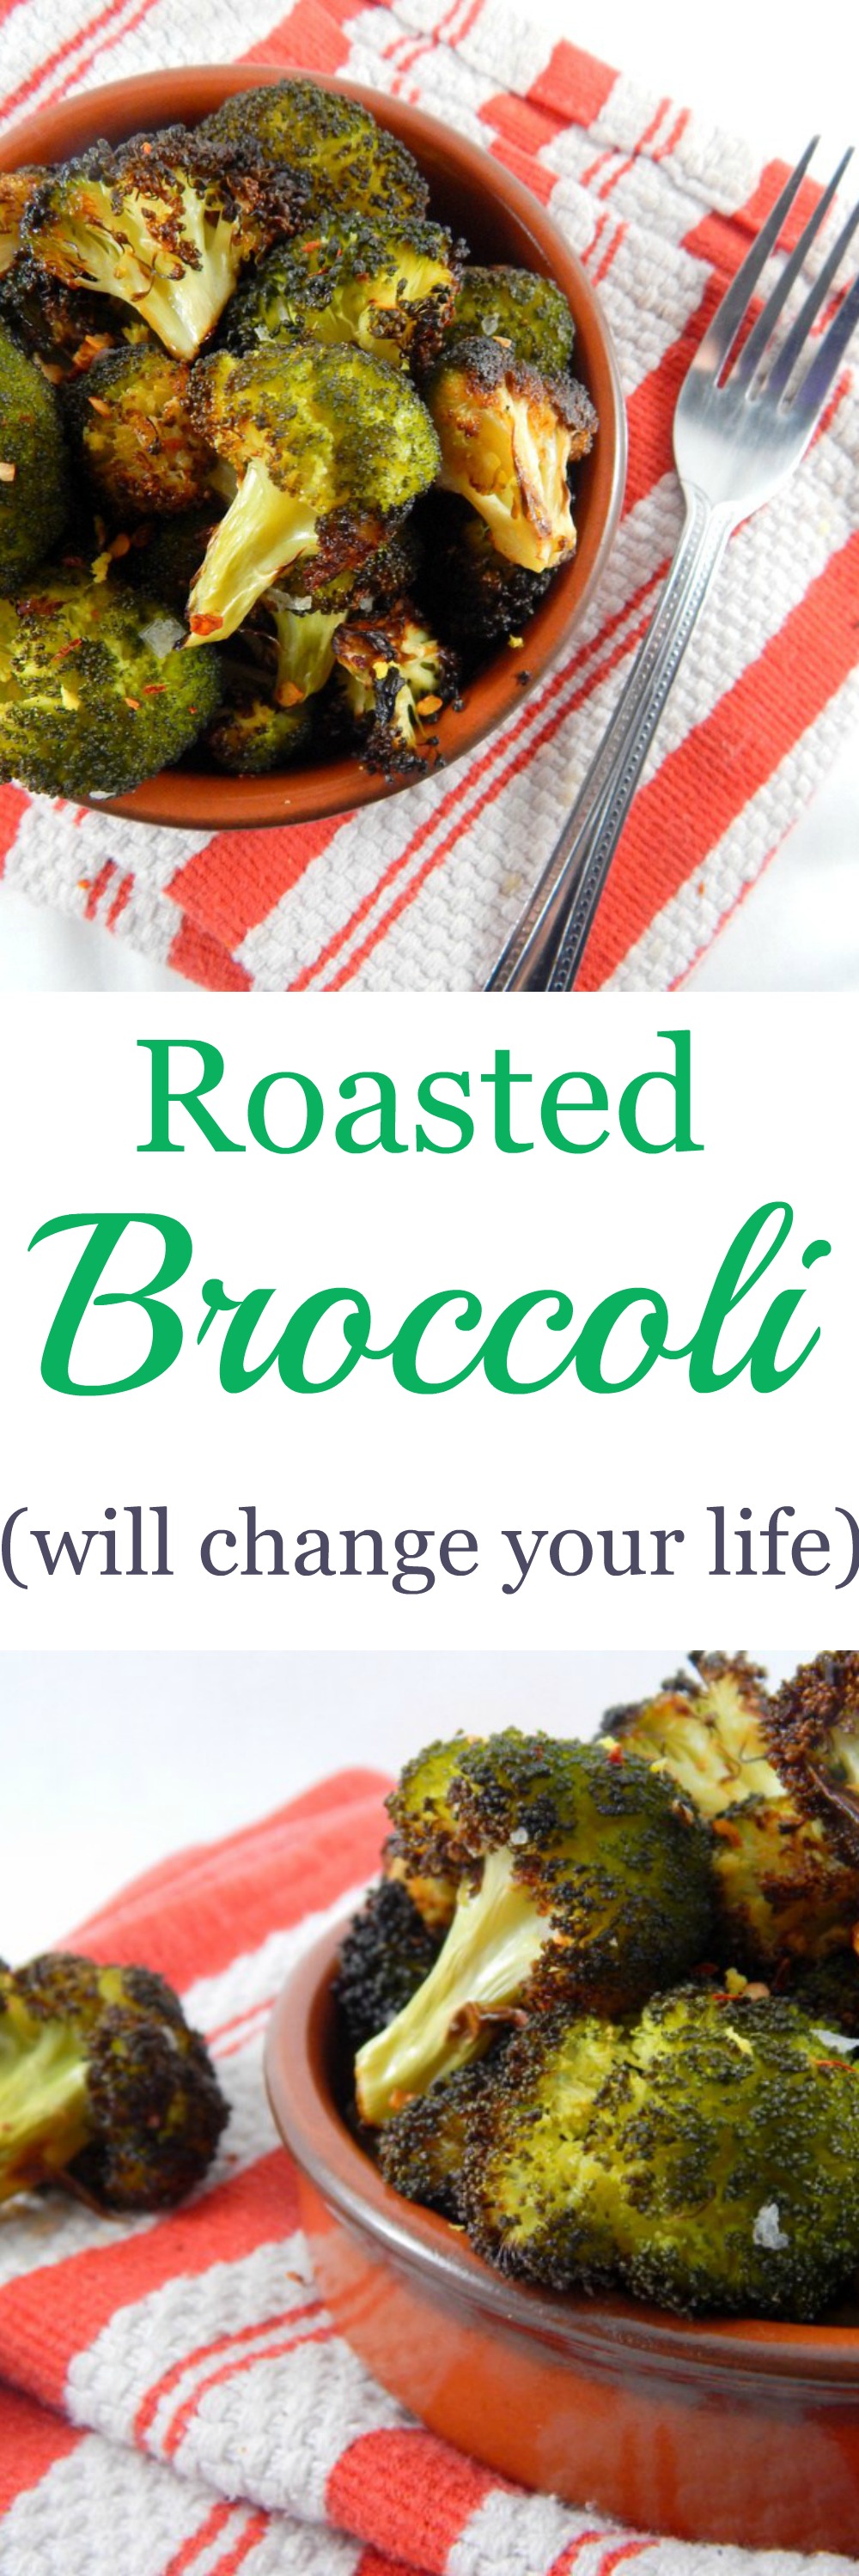 Roasted broccoli is so easy and delicious. This recipe will change how you think about broccoli.